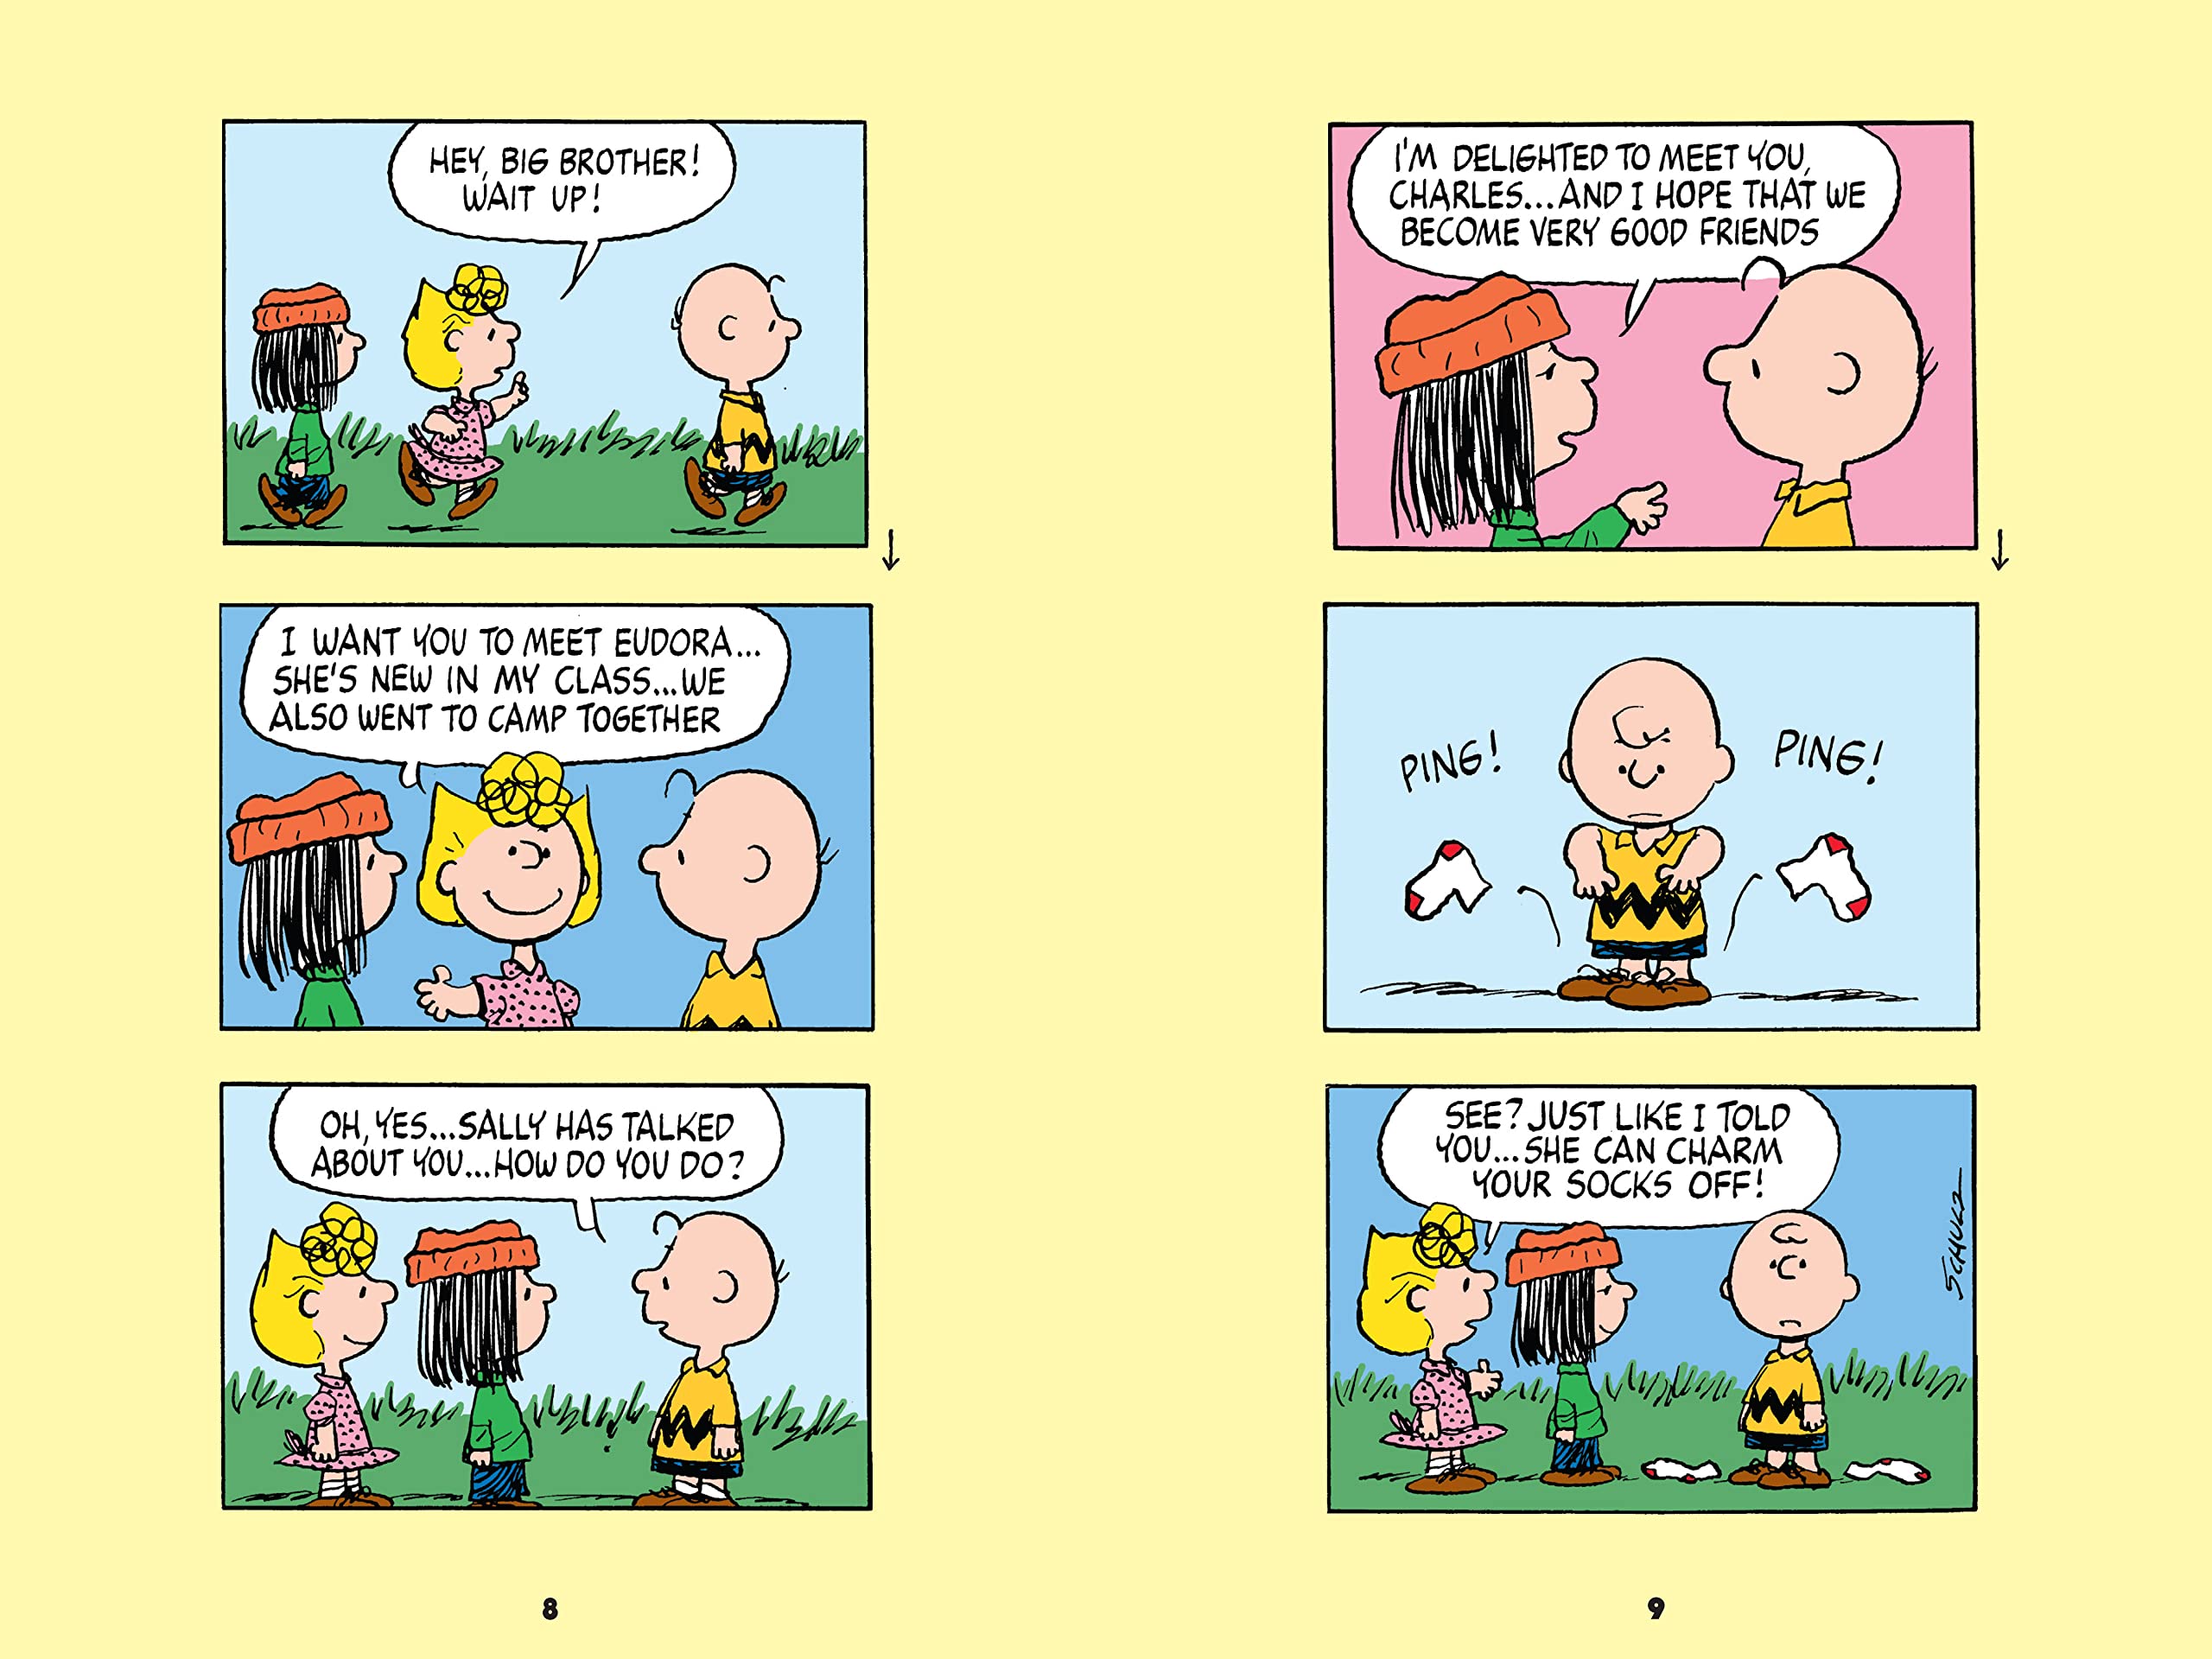 Charlie Brown: All Tied Up: A PEANUTS Collection (Volume 13) (Peanuts Kids)